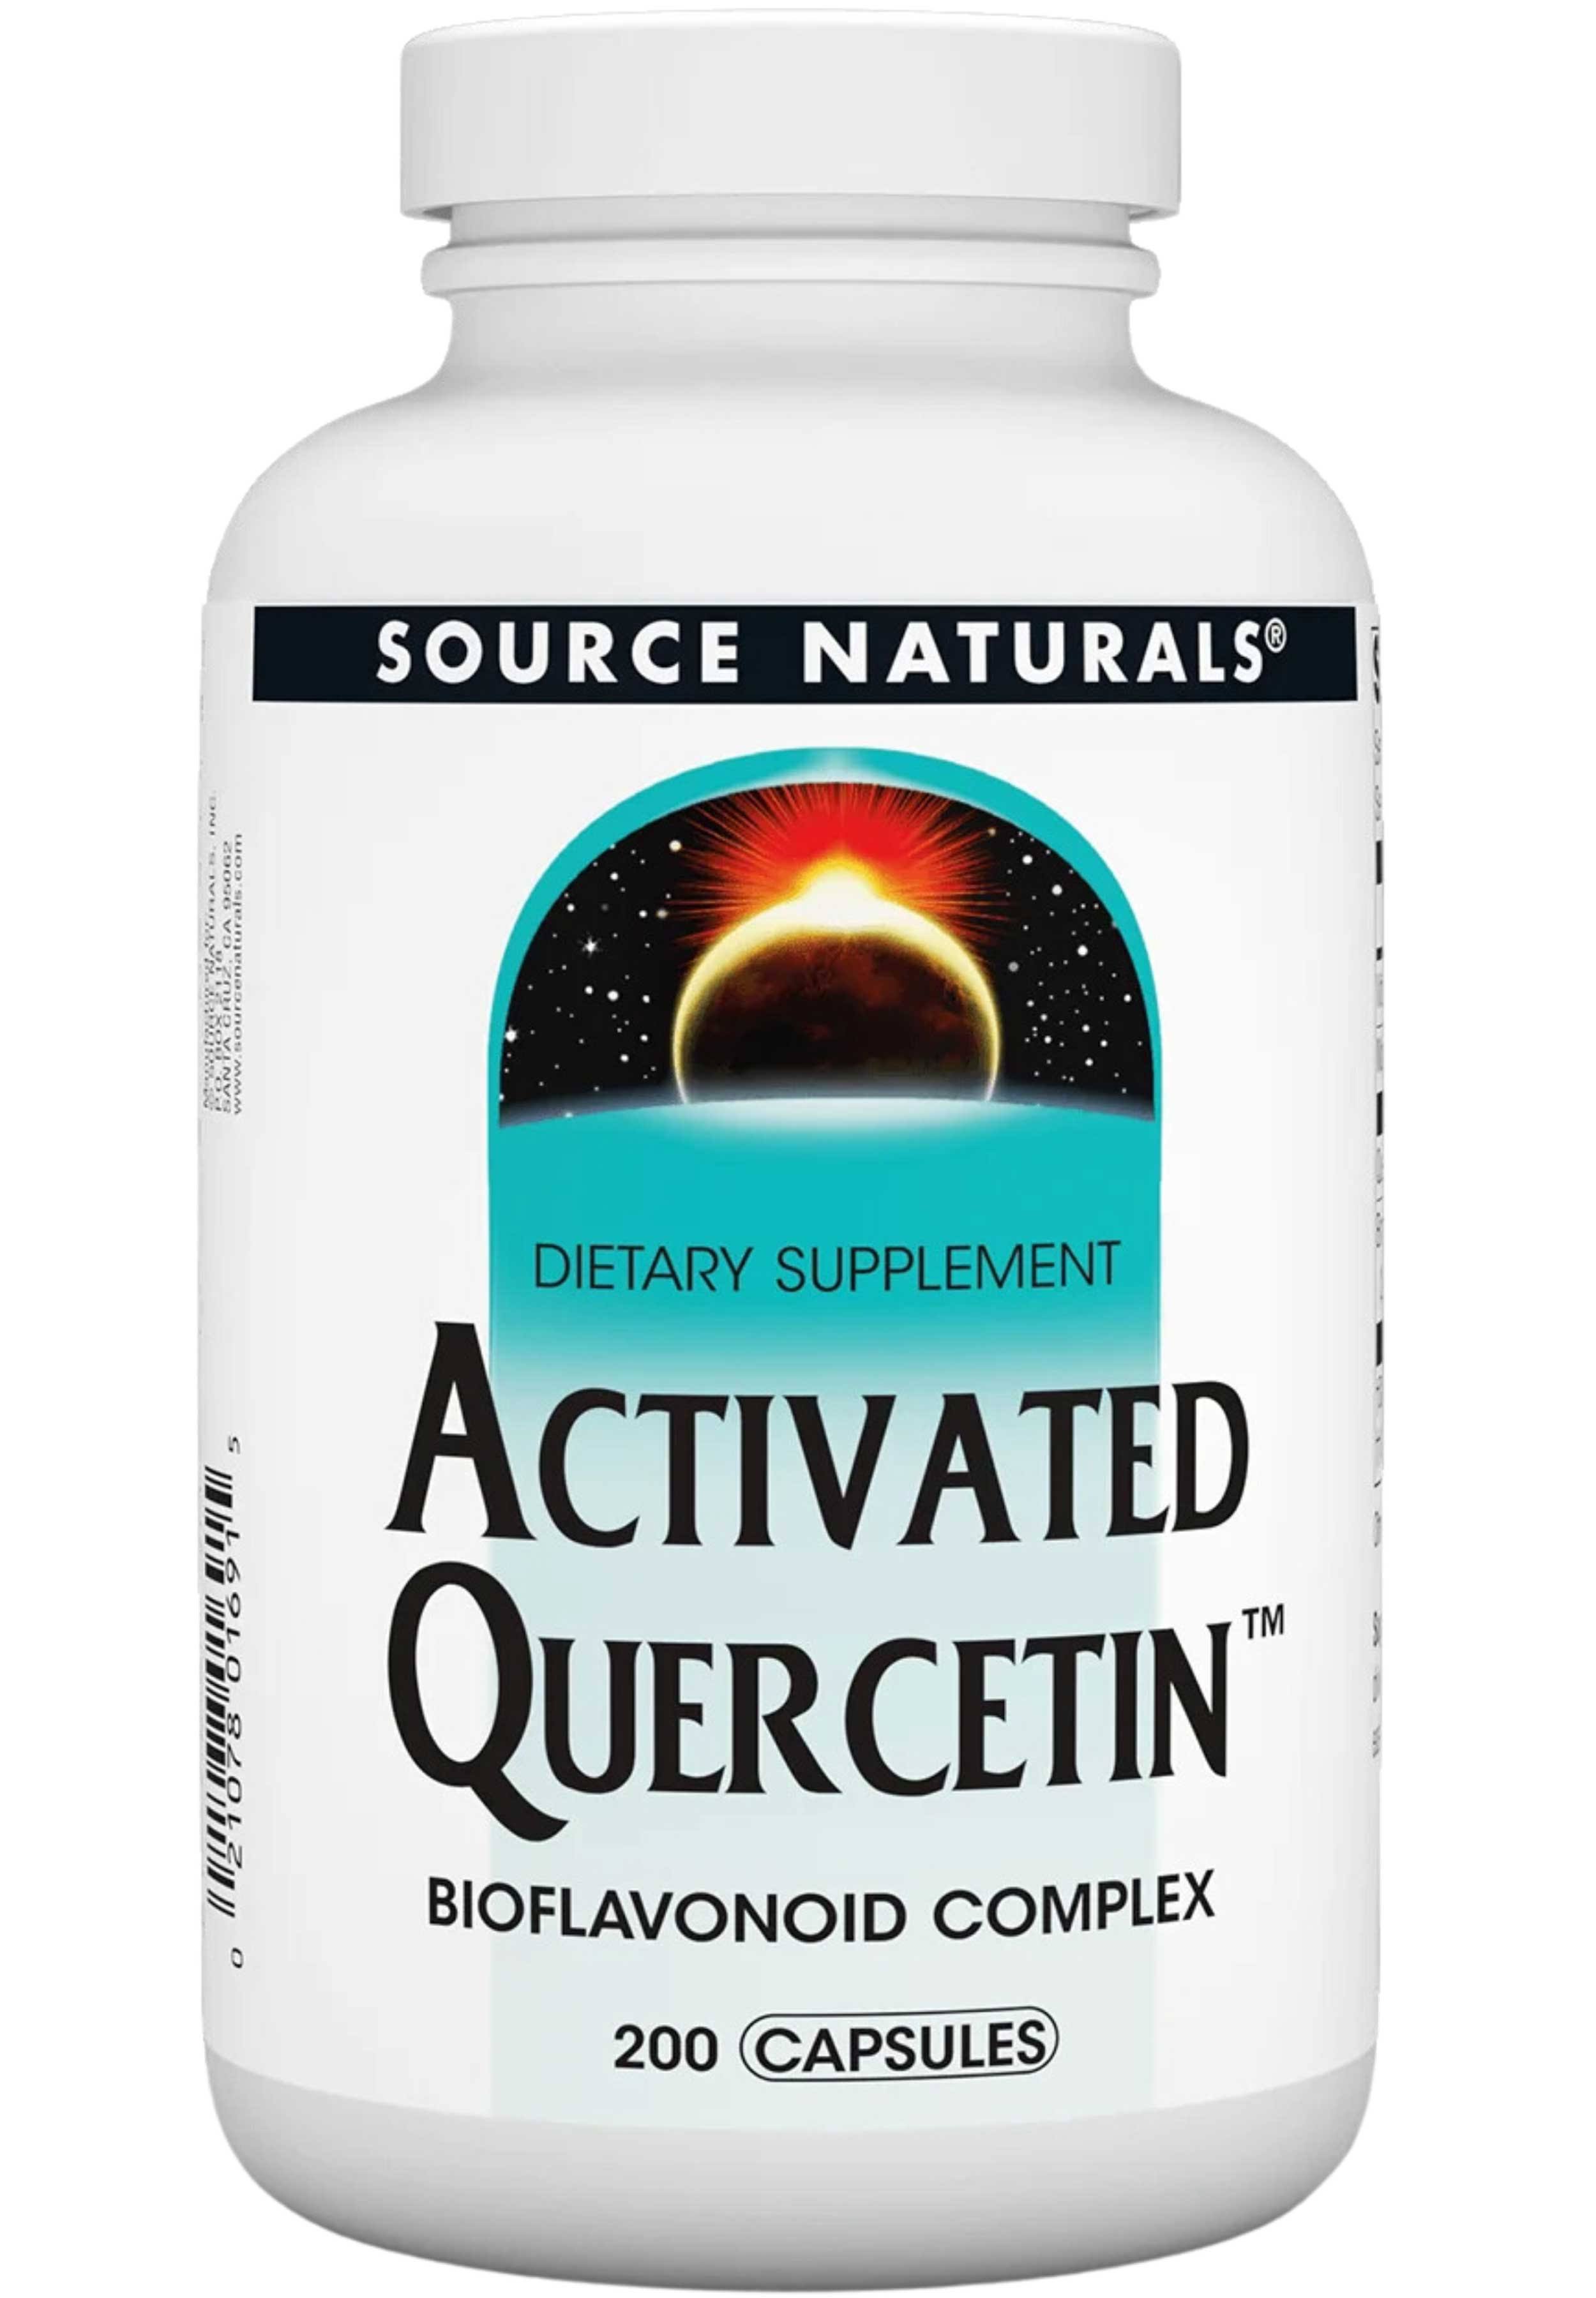 Source Naturals Activated Quercetin Dietary Supplement - 200 Tablets